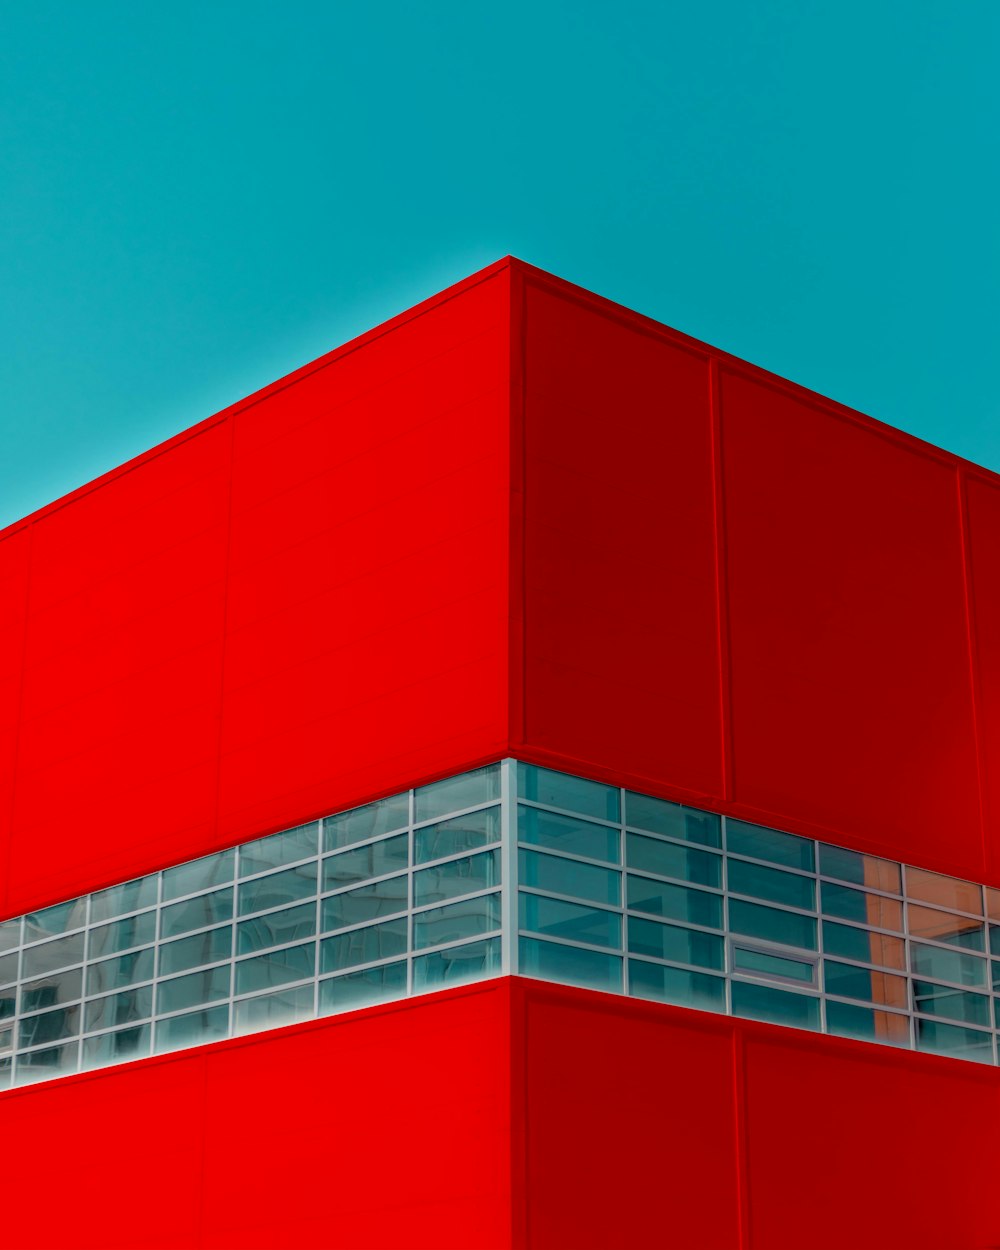 red and white building under blue sky during daytime